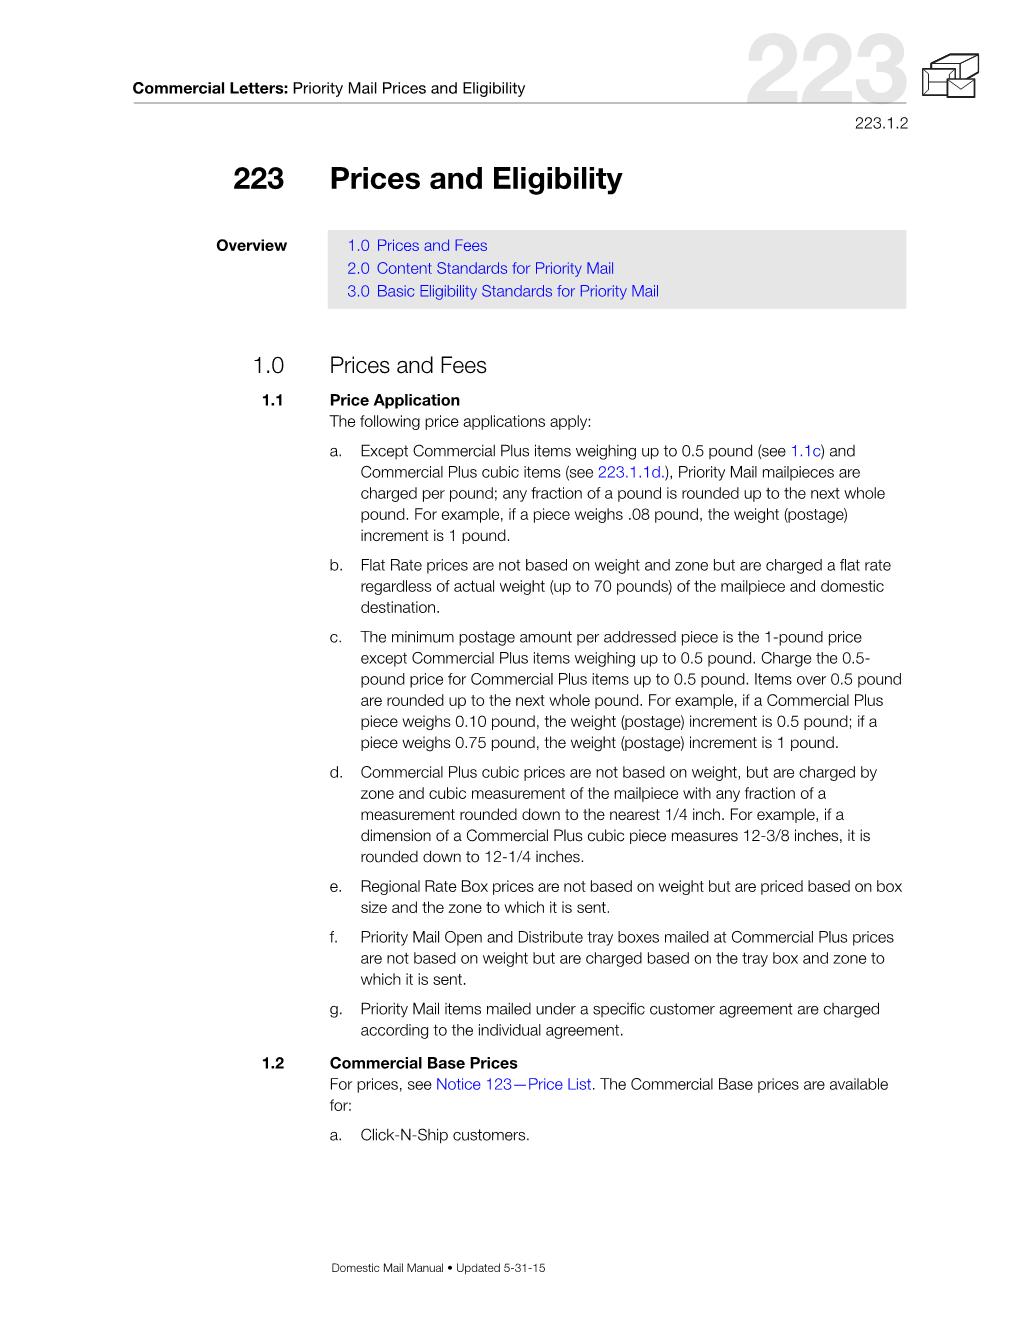 DMM 223 Priority Mail Prices and Eligibility for Commercial Letters